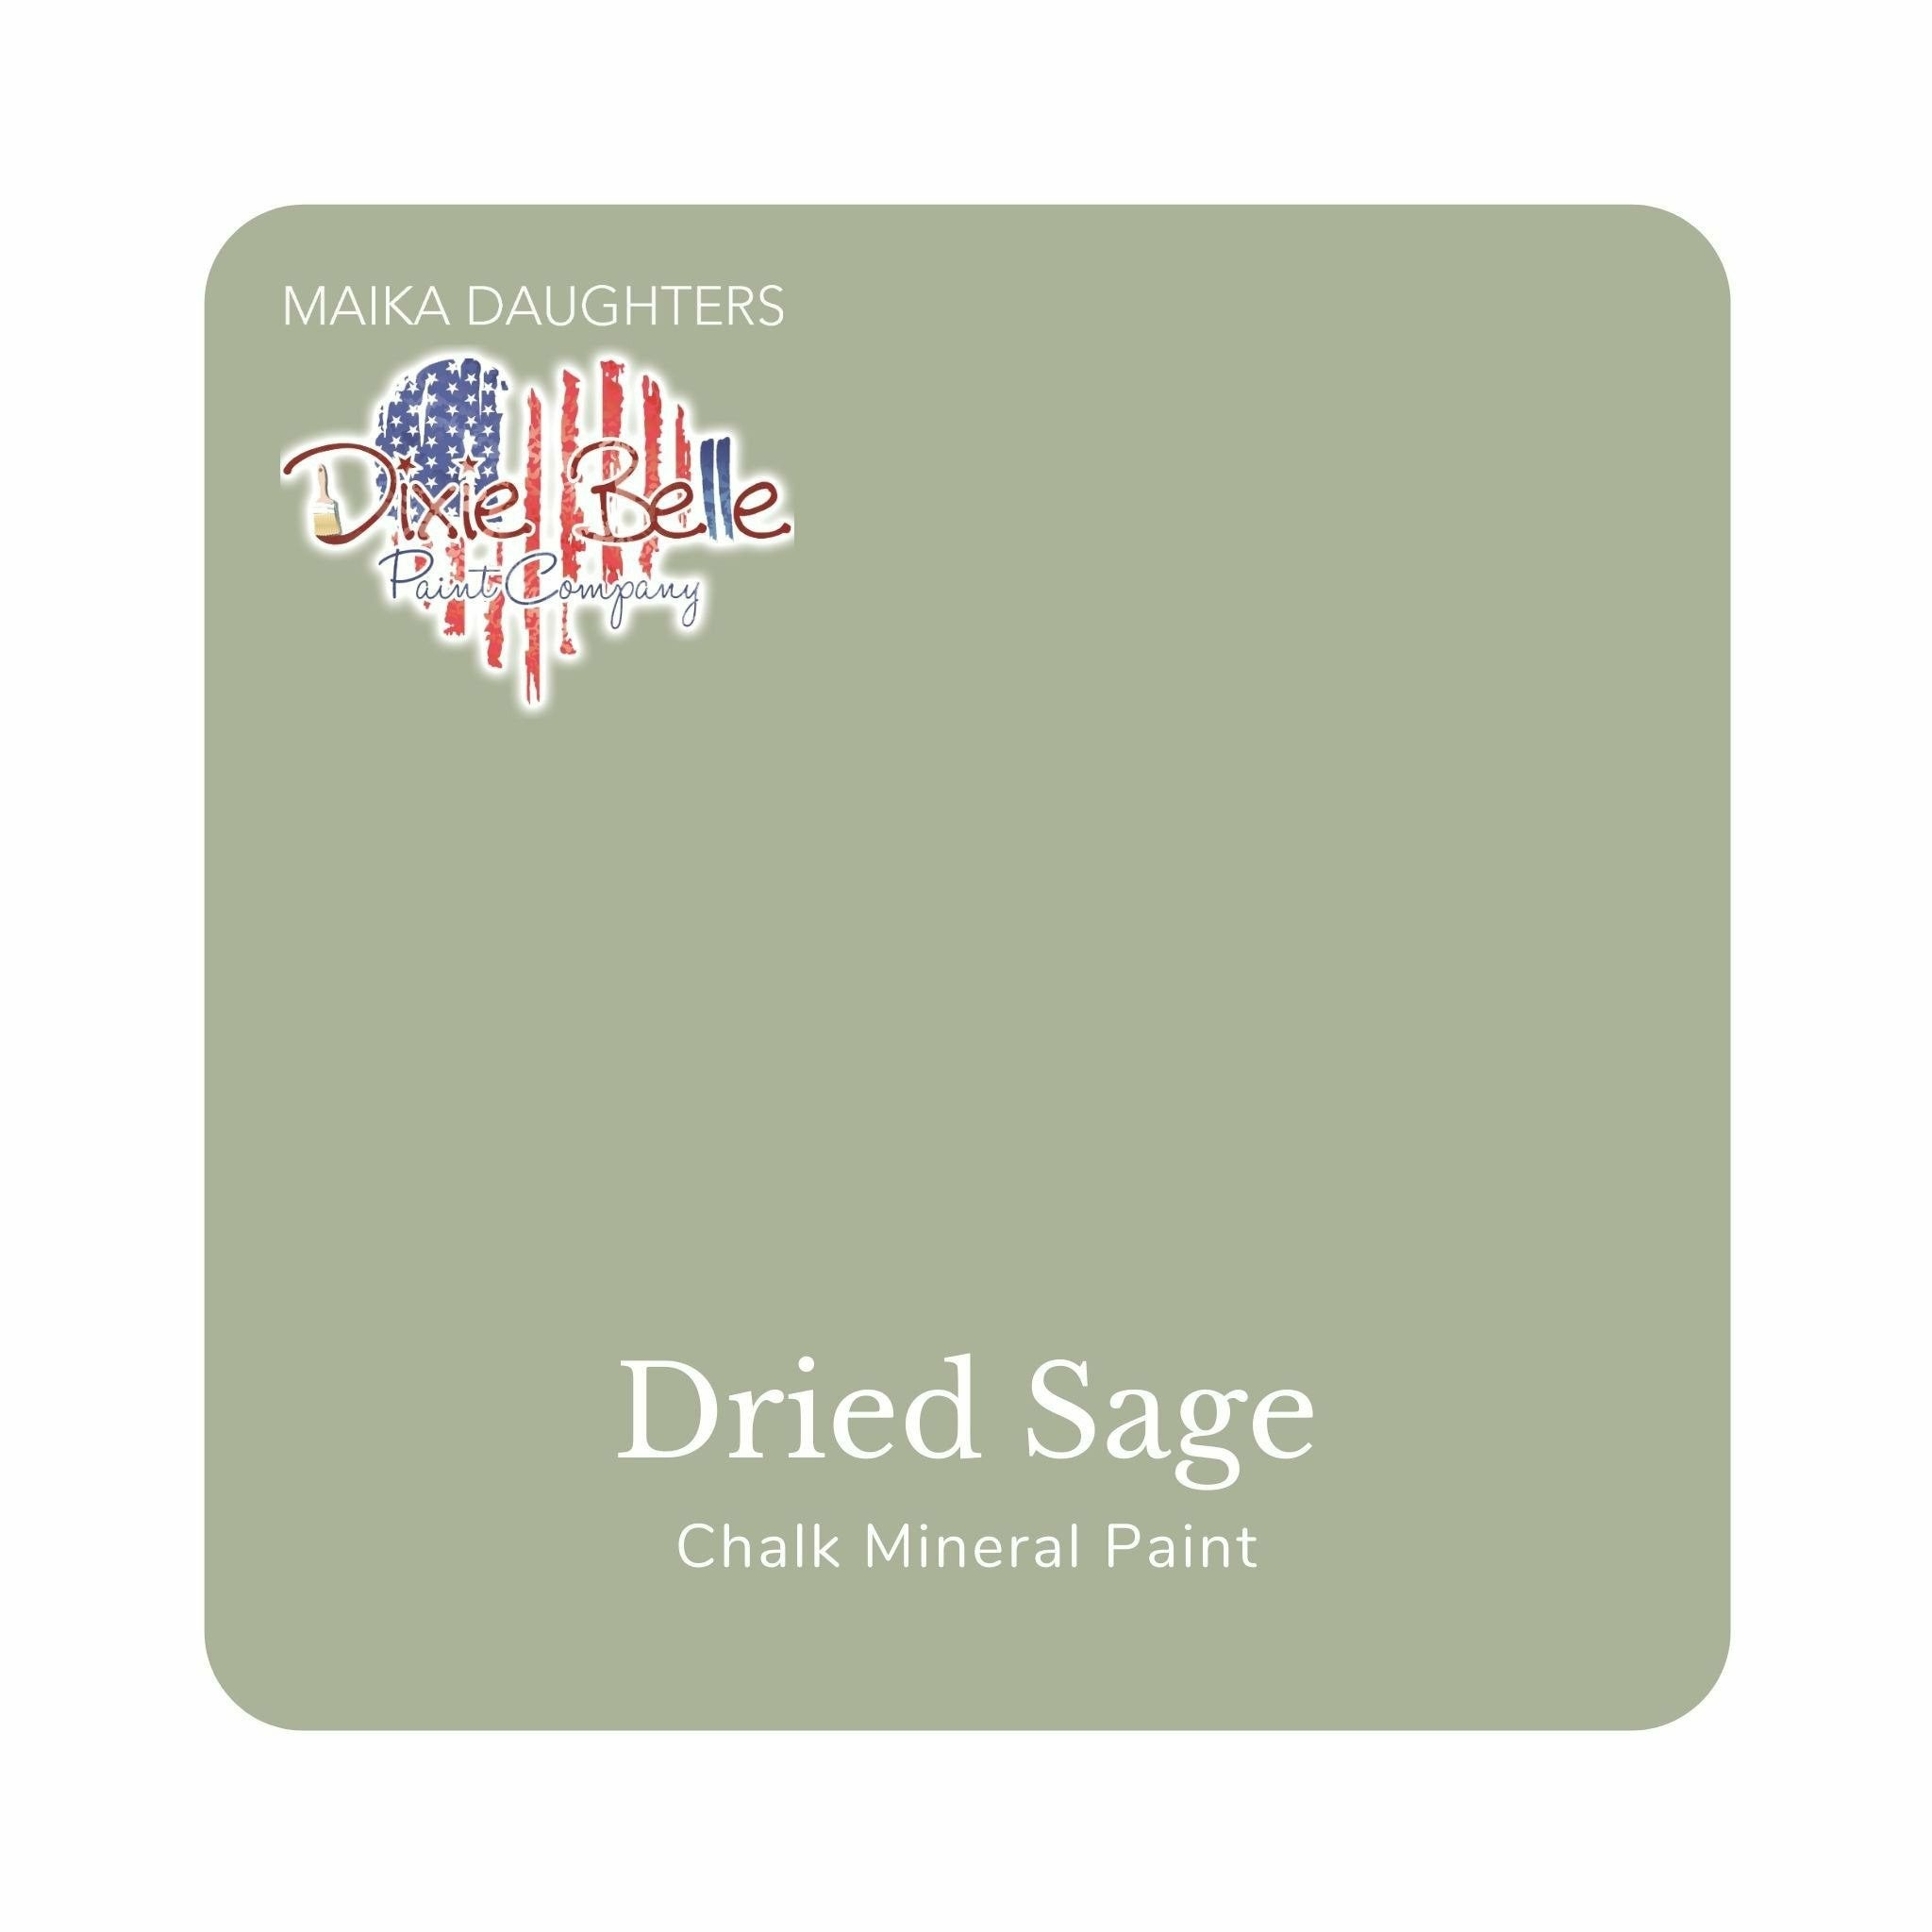 A square swatch card of Dixie Belle Paint Company’s Dried Sage Chalk Mineral Paint is against a white background. This color is a grey with green untertones.